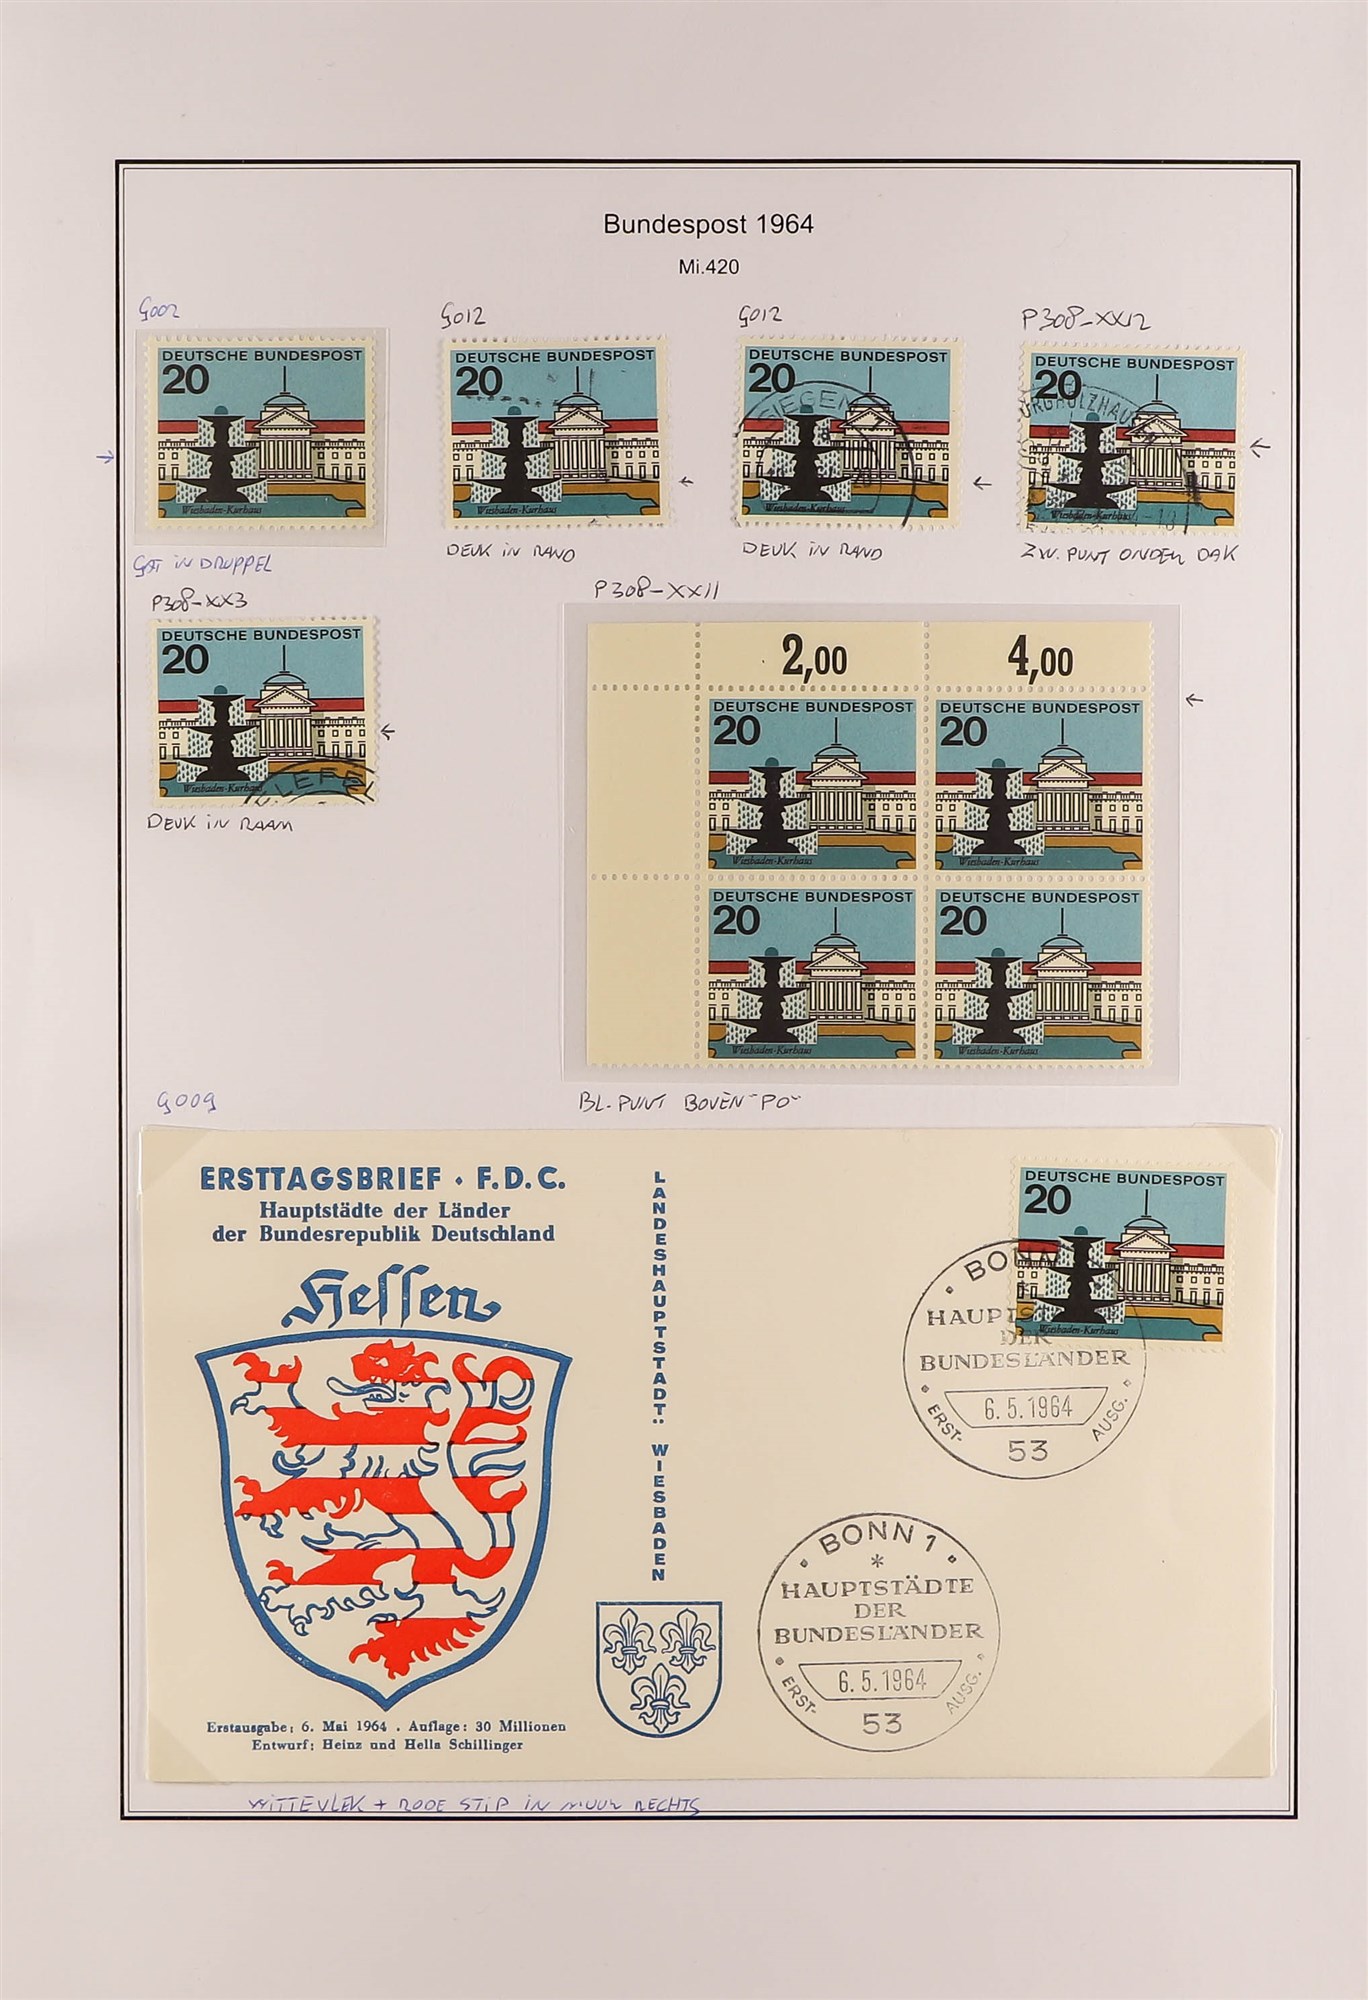 GERMANY WEST 1960 - 1964 SPECIALIZED COLLECTION of 600+ mint / never hinged mint and used stamps, - Image 10 of 13